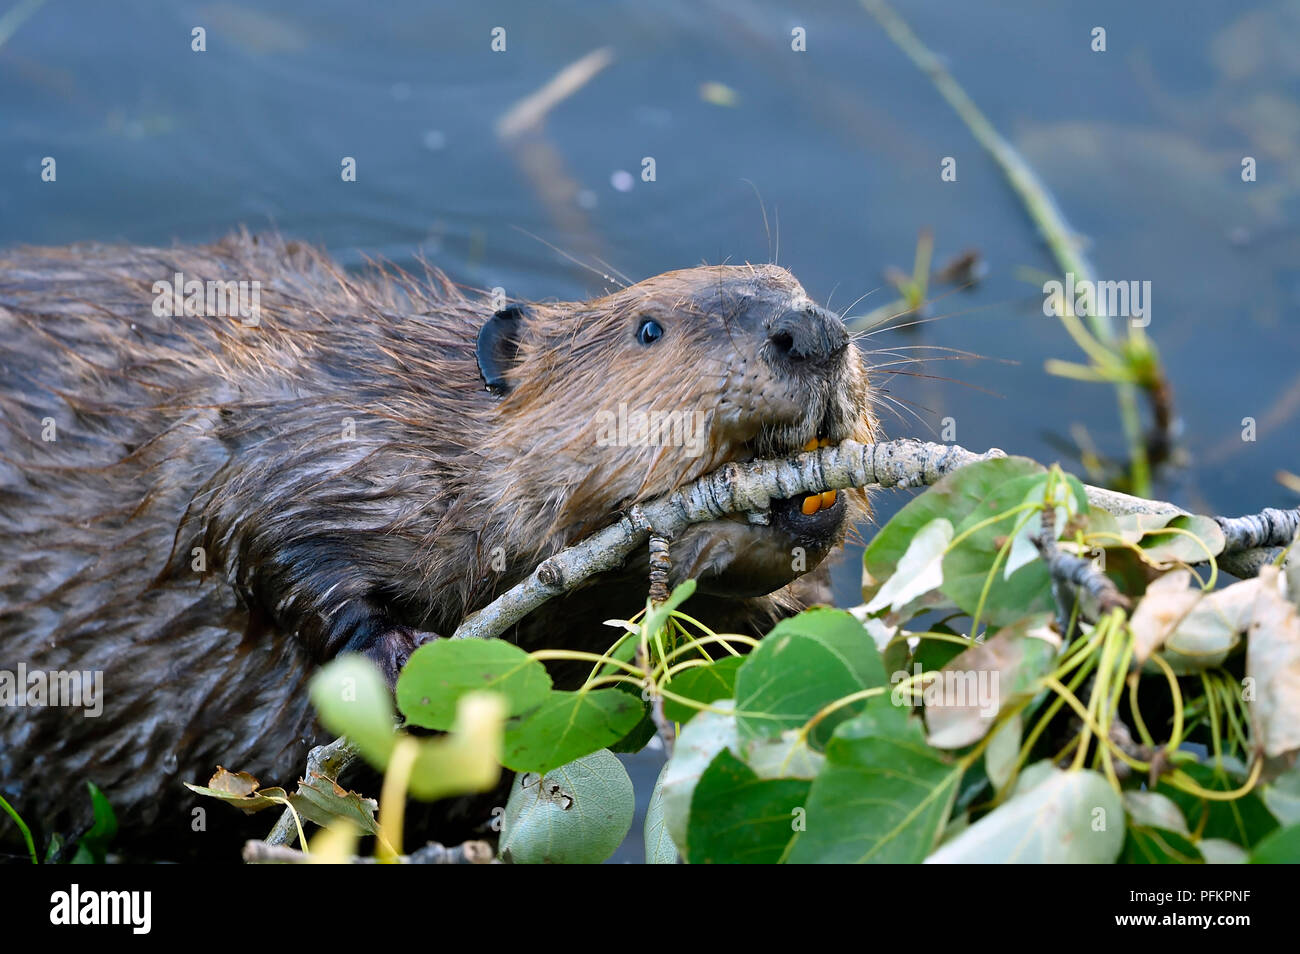 A close up image of a wild beaver  'Castor canadensis'; biting into an aspen tree branch at his beaver pond near Hinton Alberta Canada Stock Photo